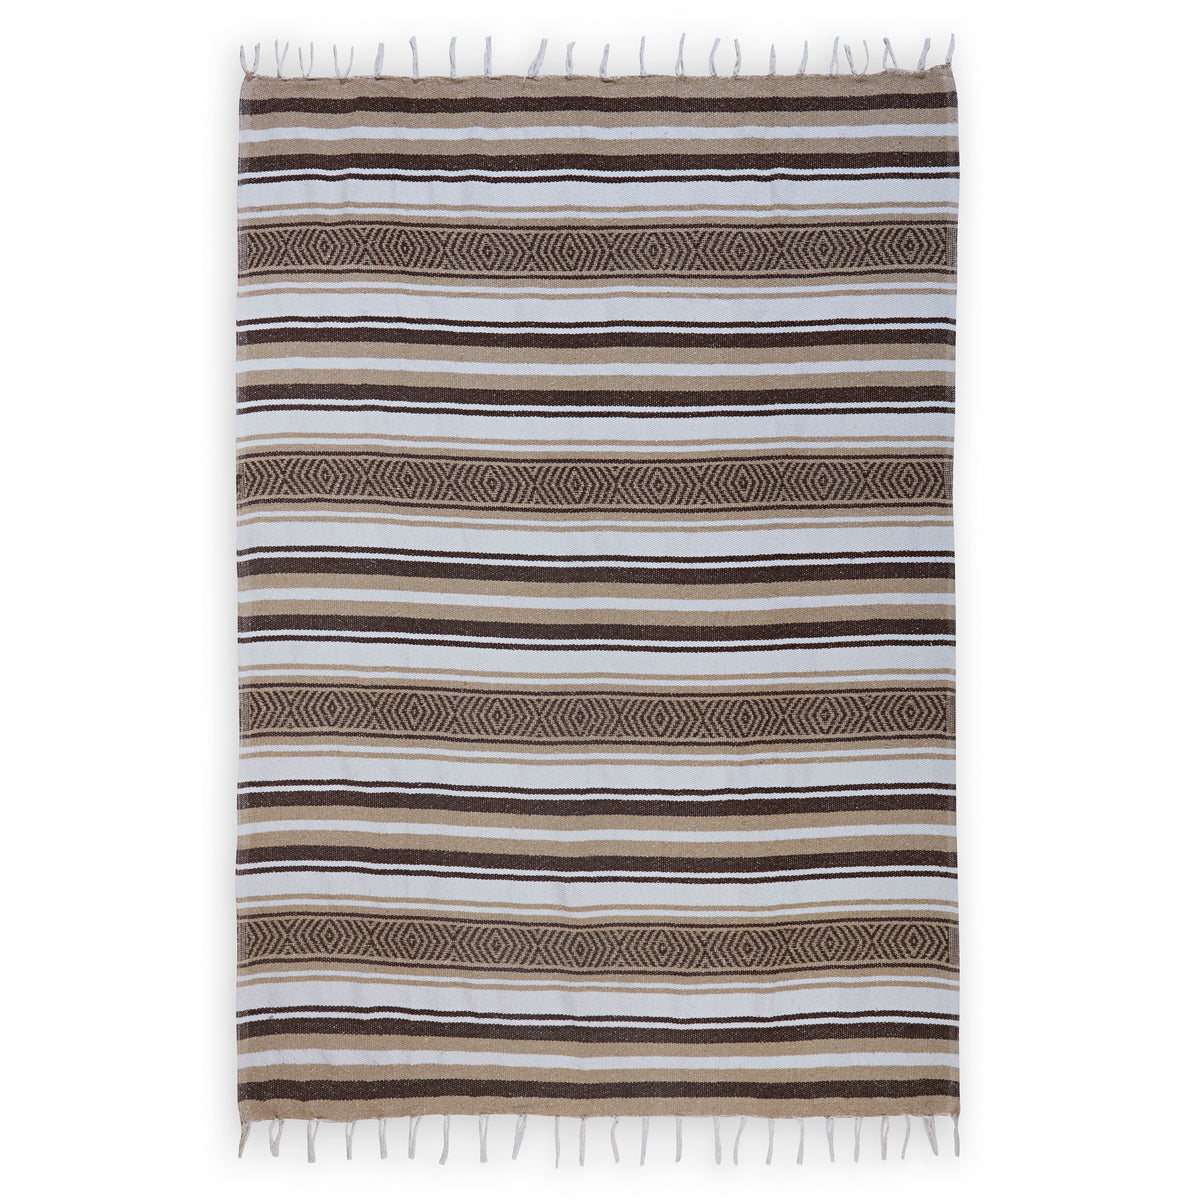 Traditional Mexican Woven Blanket tan brown flat